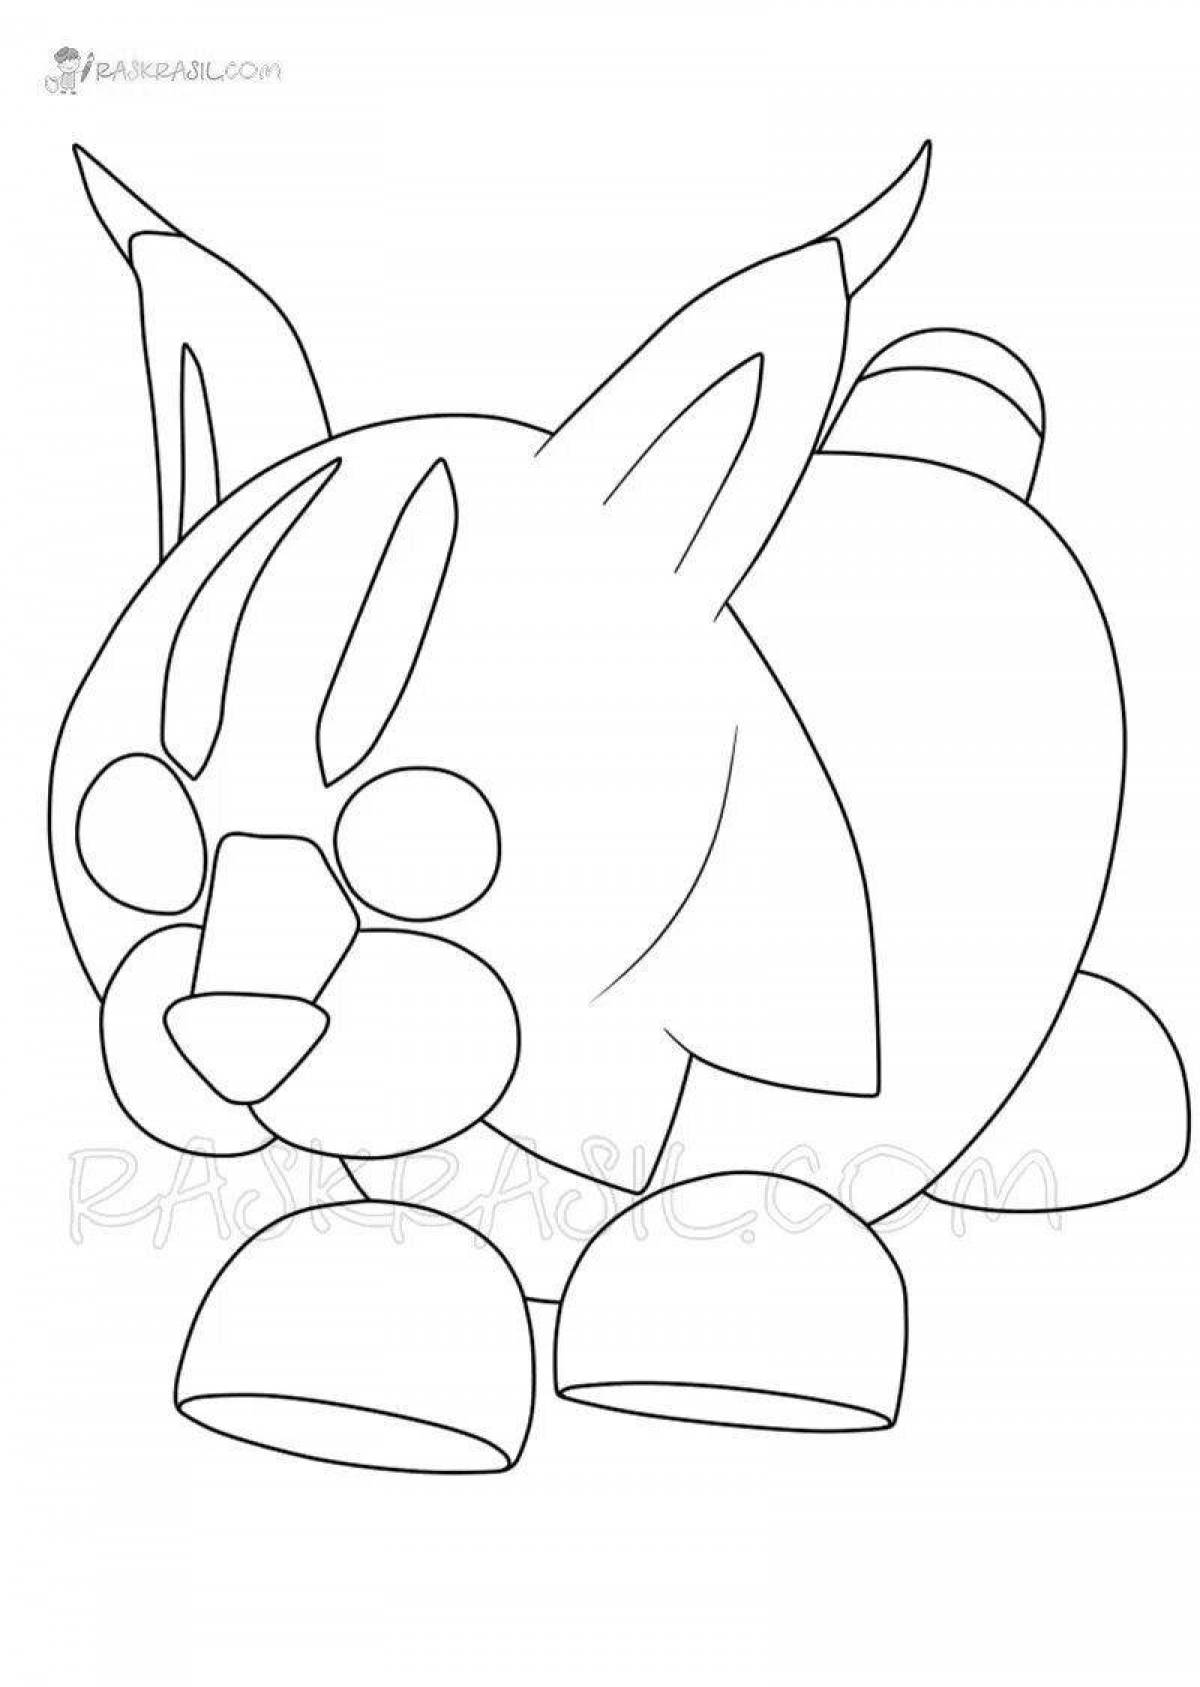 Amazing adopt me peta and eggs coloring page